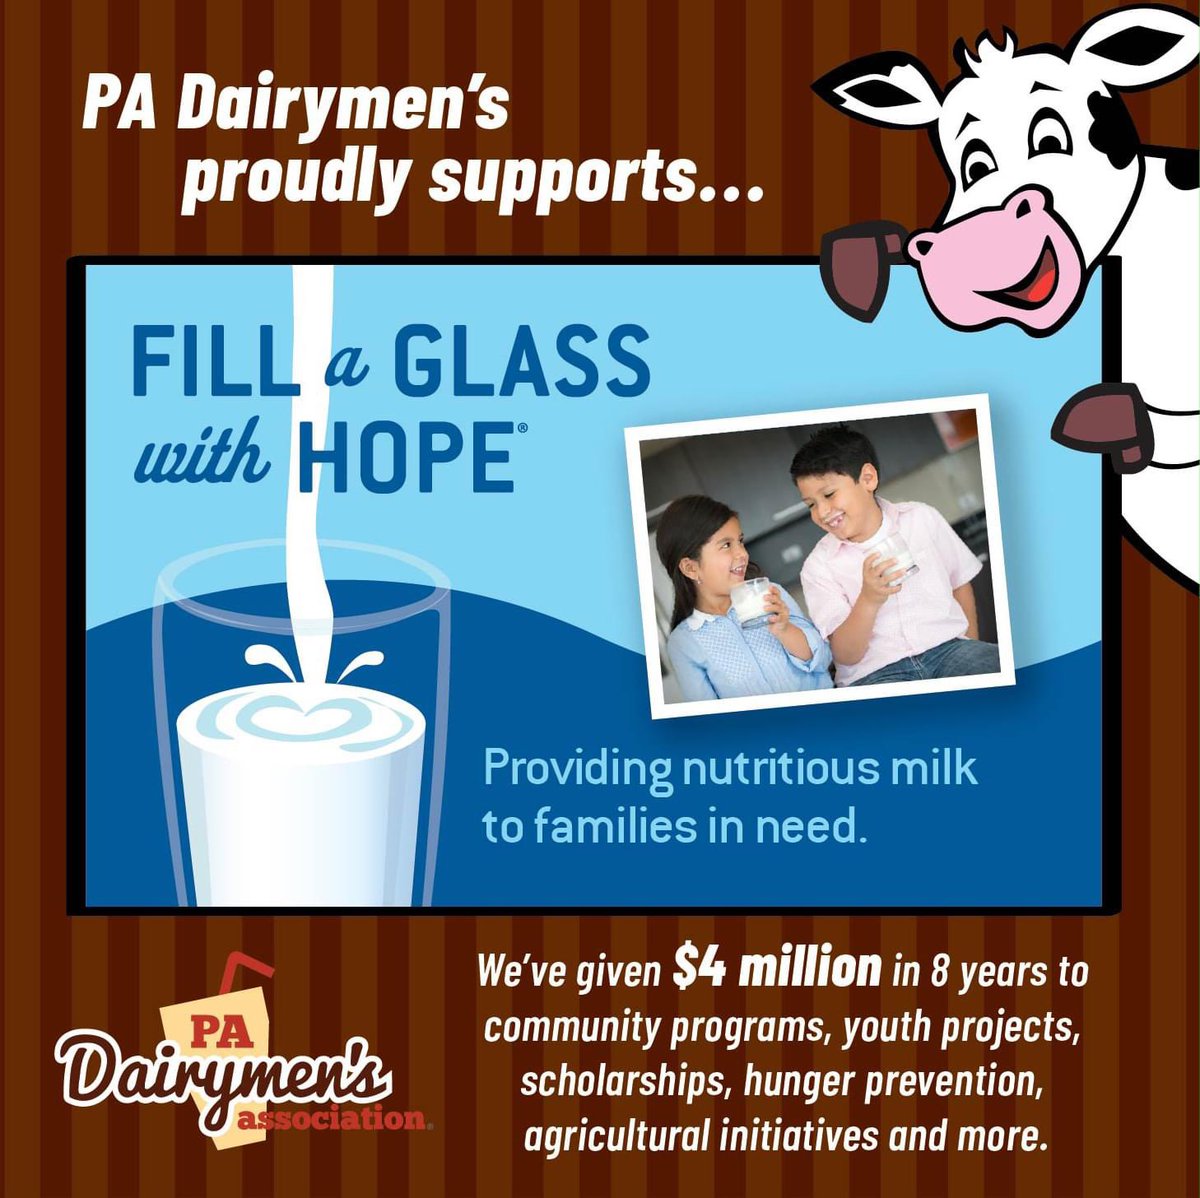 Since 2016, we are proud to be a part of a dynamic team that has distributed more than 36 million servings of fresh milk through Fill a Glass with Hope® via the charitable food network of pantries, soup kitchens, shelters, and feeding programs for families in need.